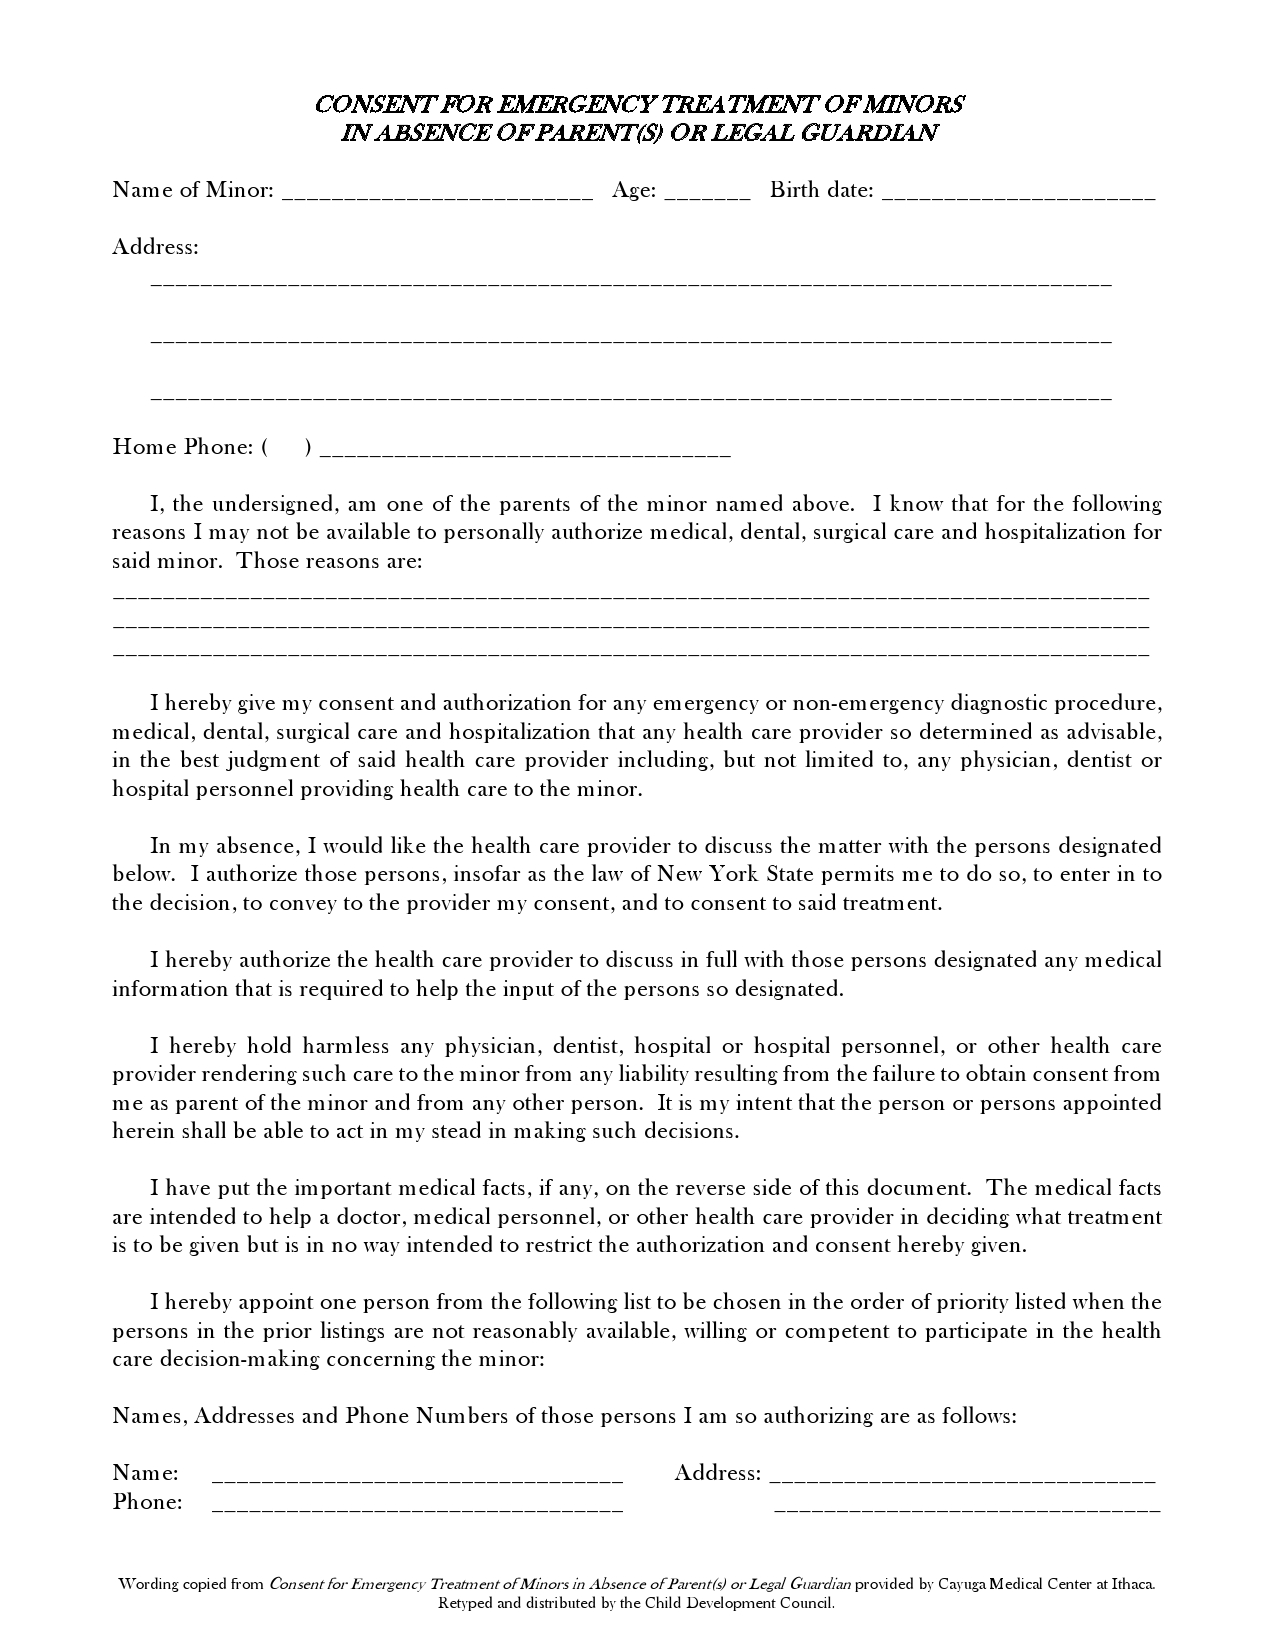 Free medical consent form for minor 06